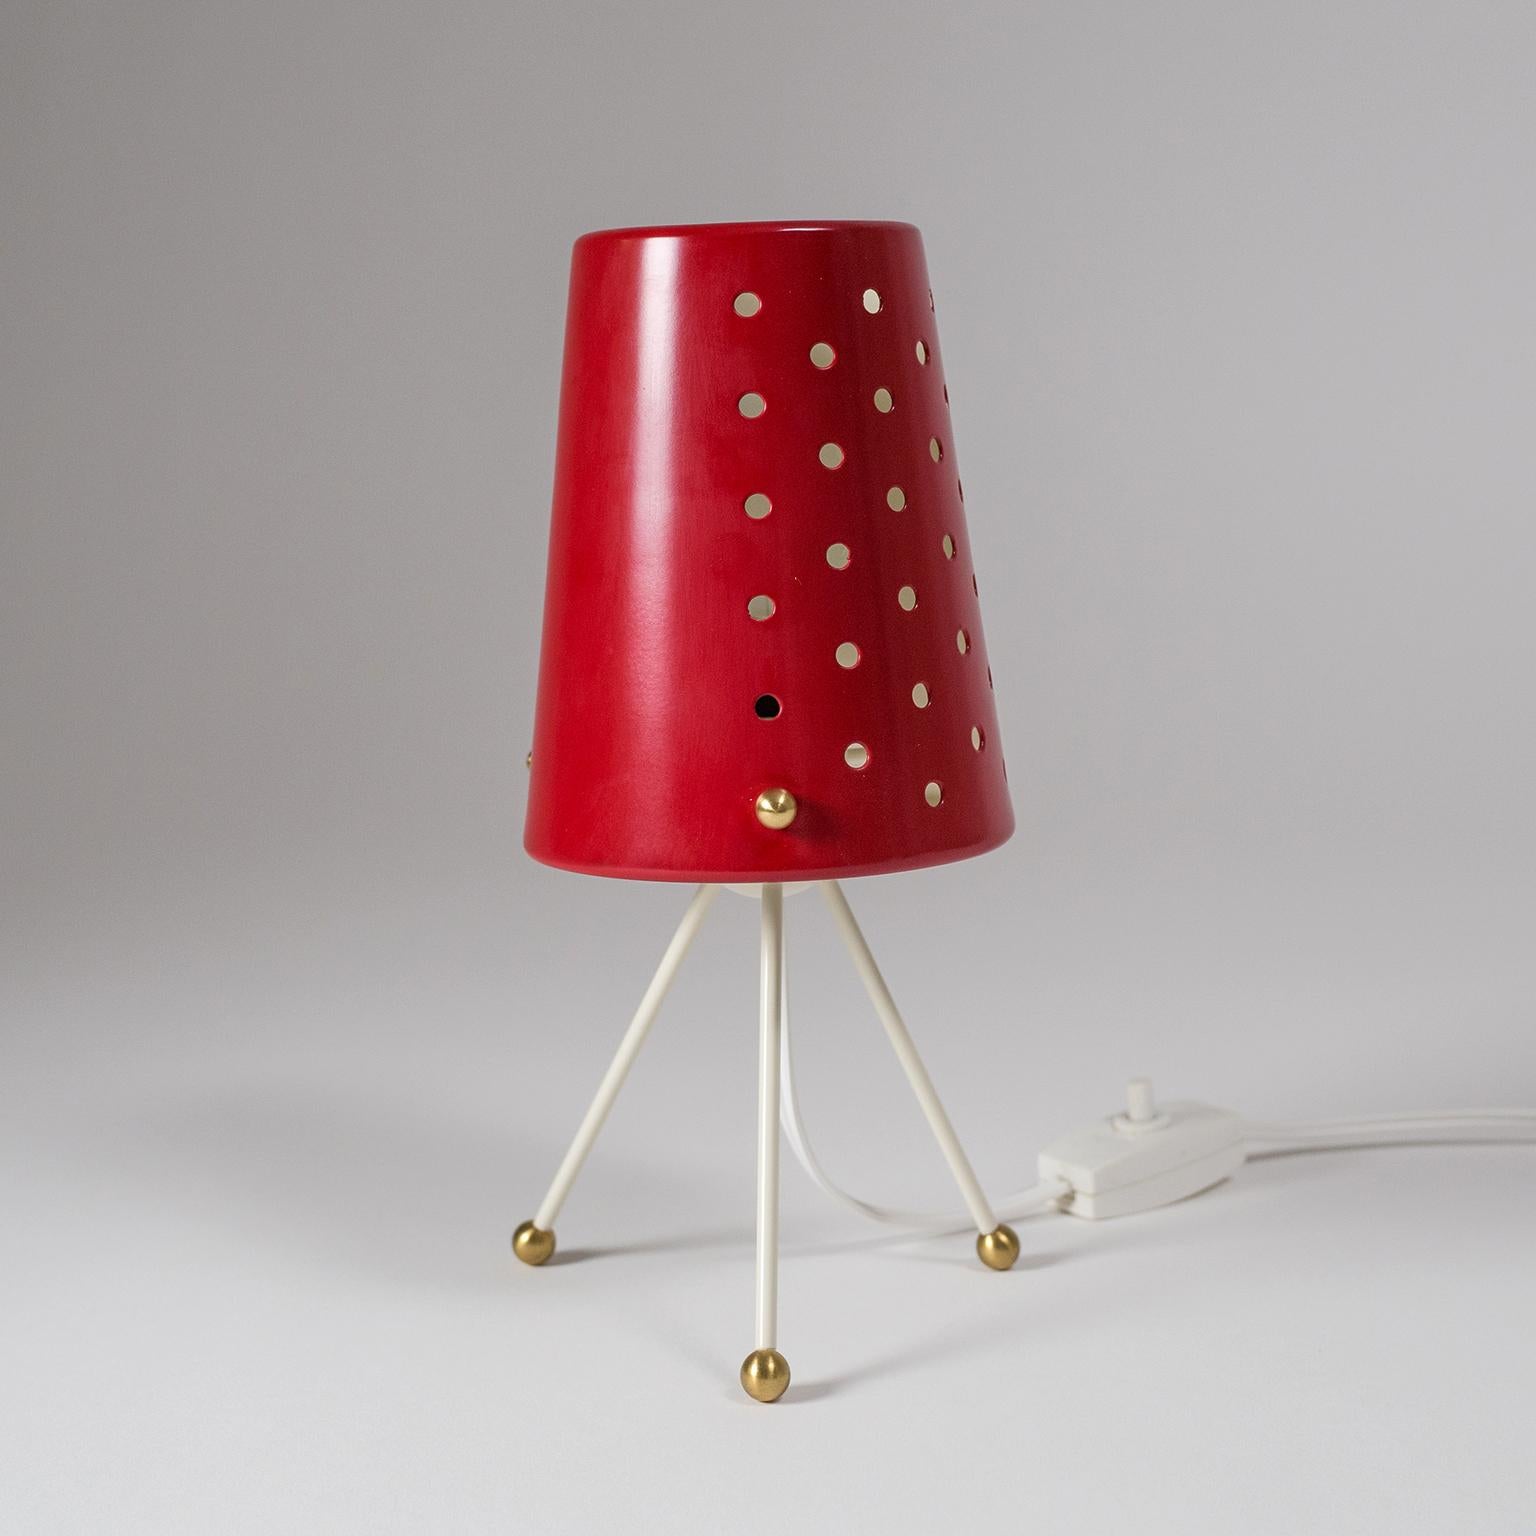 Delightful small midcentury tripod table lamp with a red lacquered shade and brass details. The shade is pierced on one half while the other half is solid. This allows for different light settings and when using a clear bulb creates a charming light